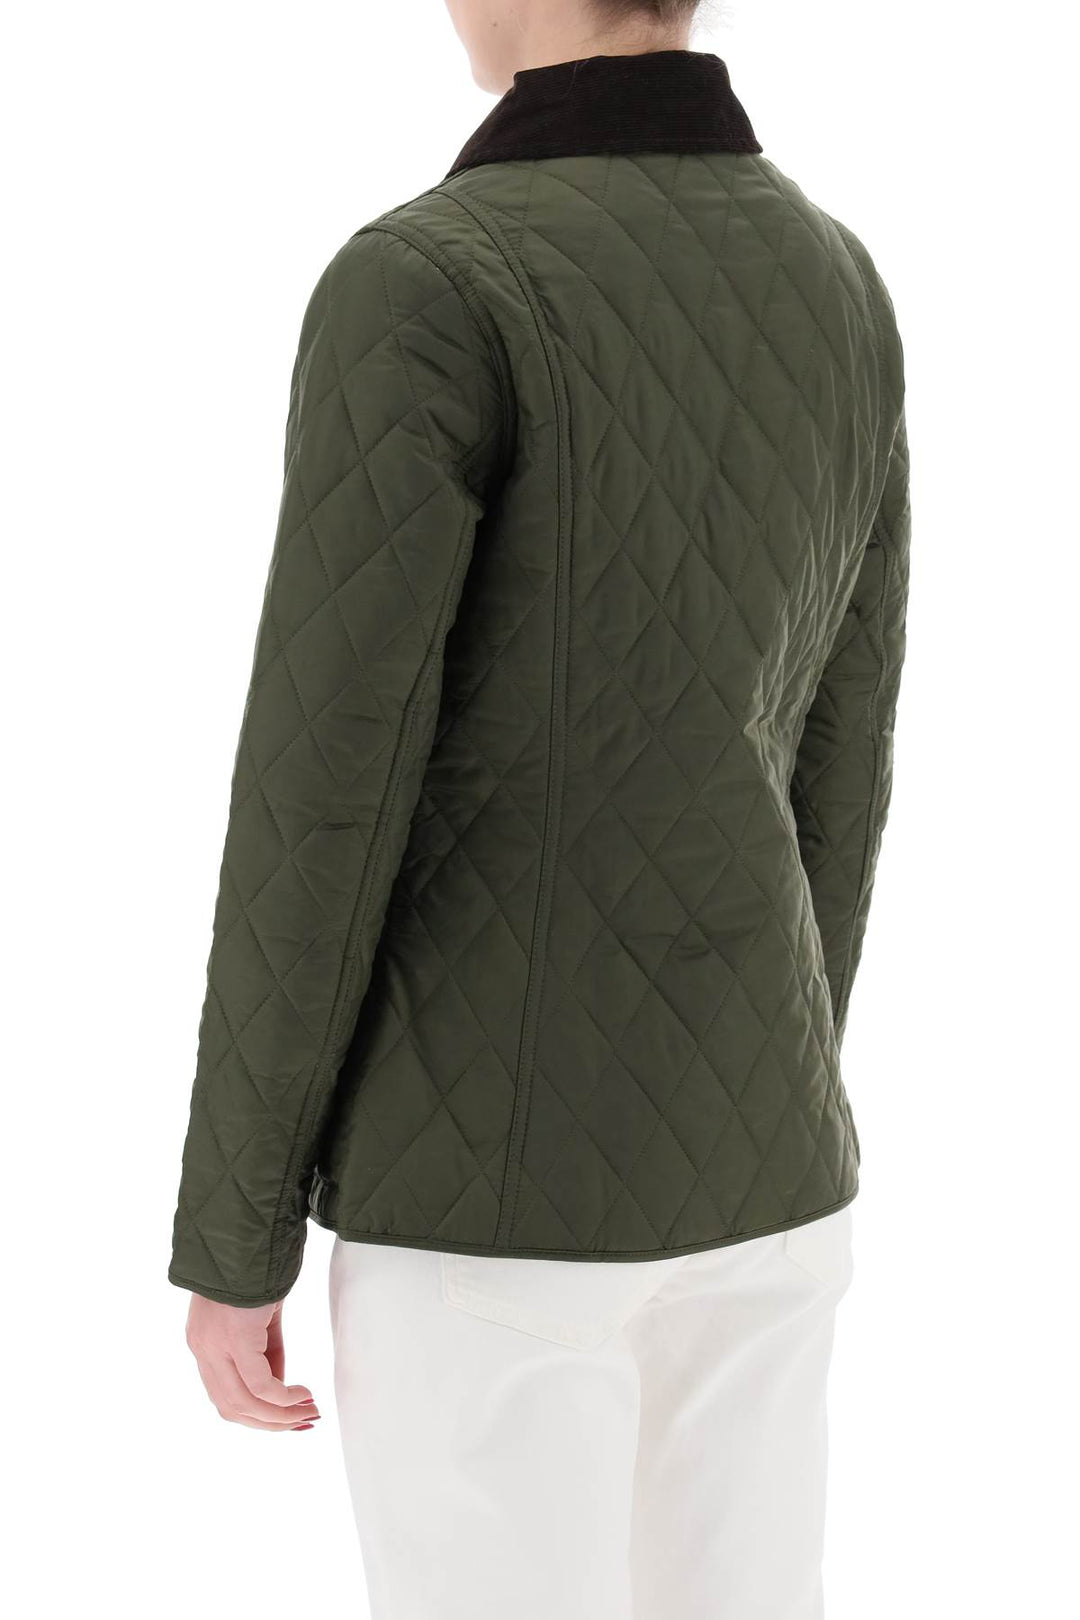 Barbour Quilted Annand   Khaki